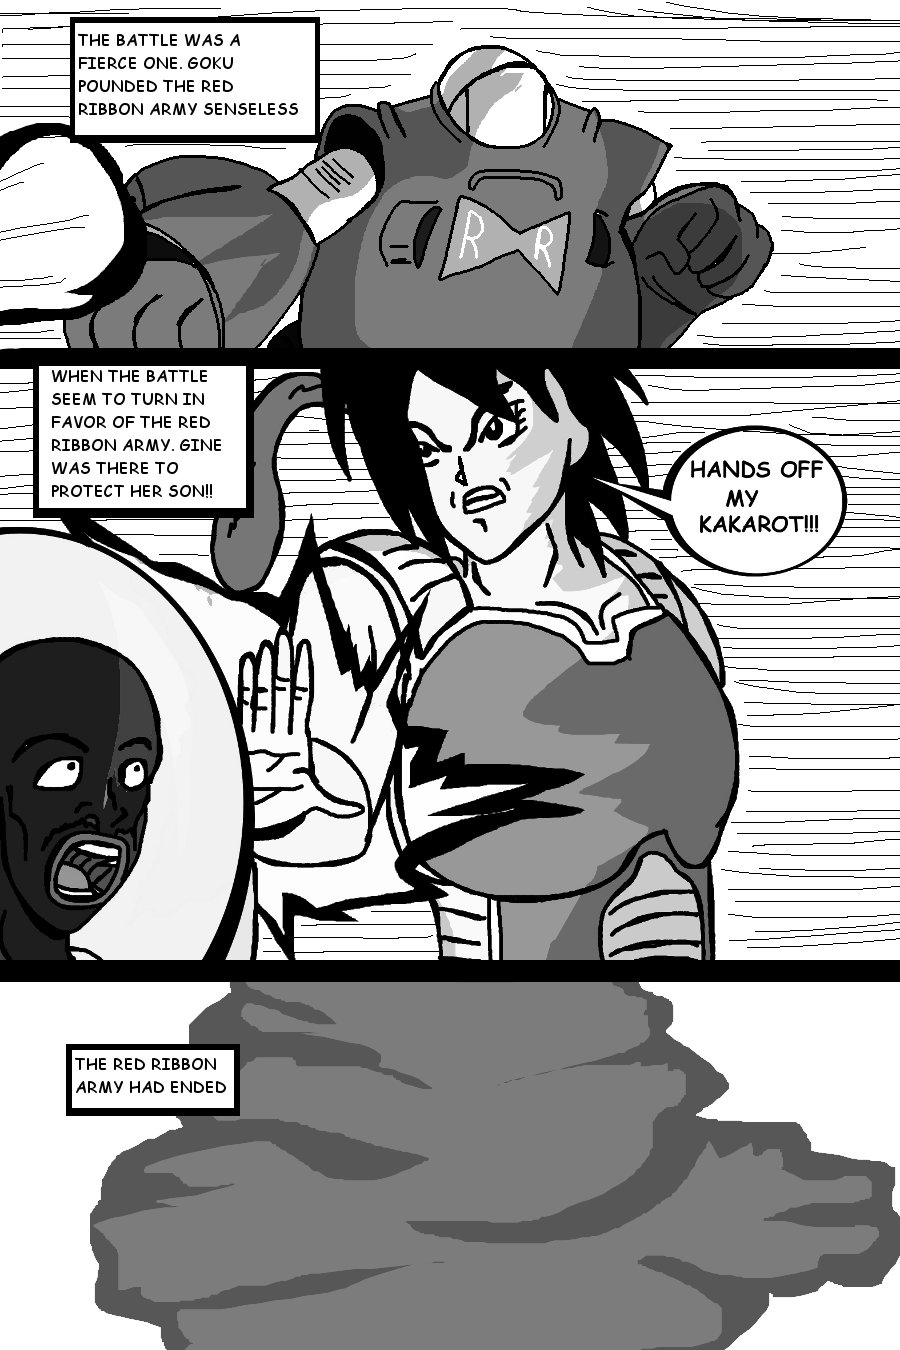 Read Dragon Ball R&R Fan comics :: DragonBall Pride Chapter 4 Part 3 Honour  And Growth 1